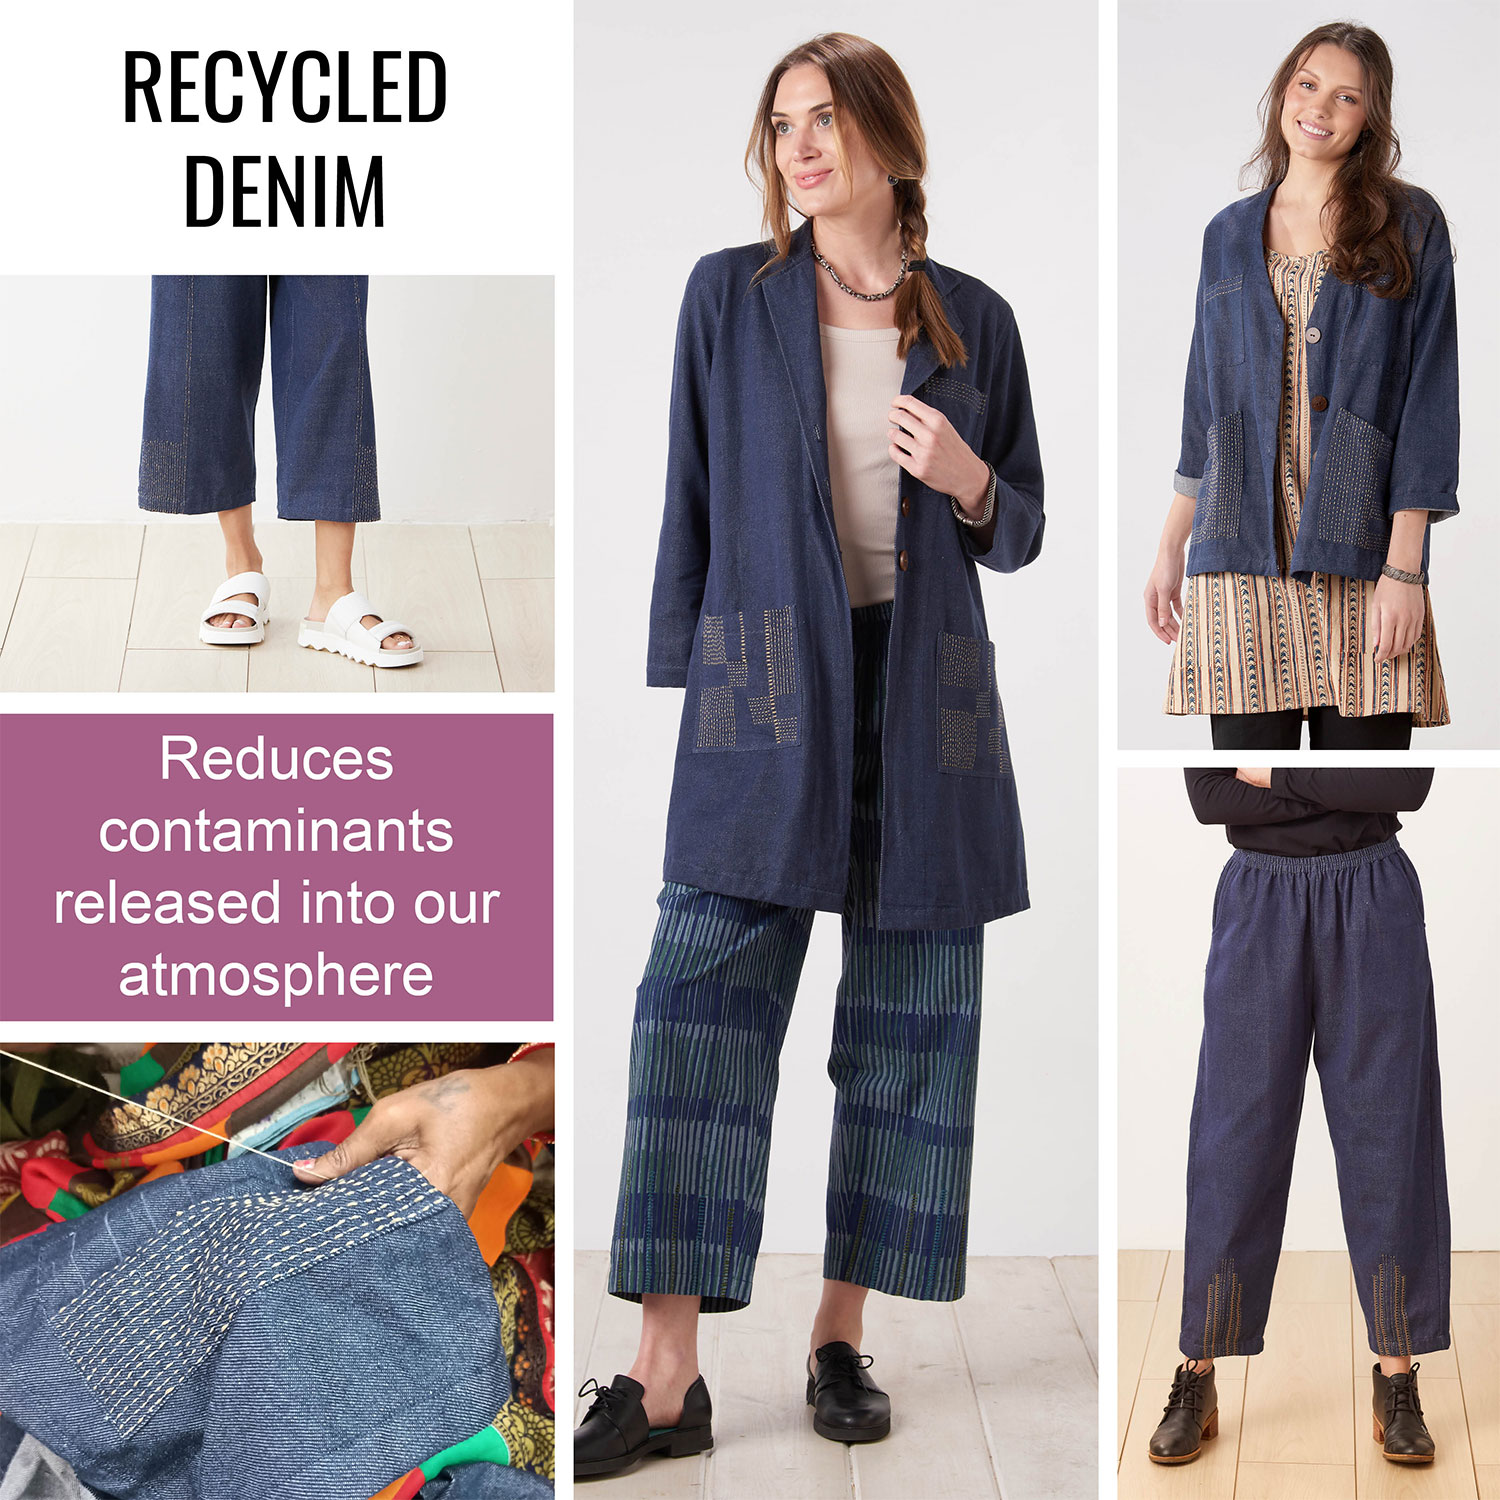 RECYCLED DENIM Reduces contaminants released into our atmosphere